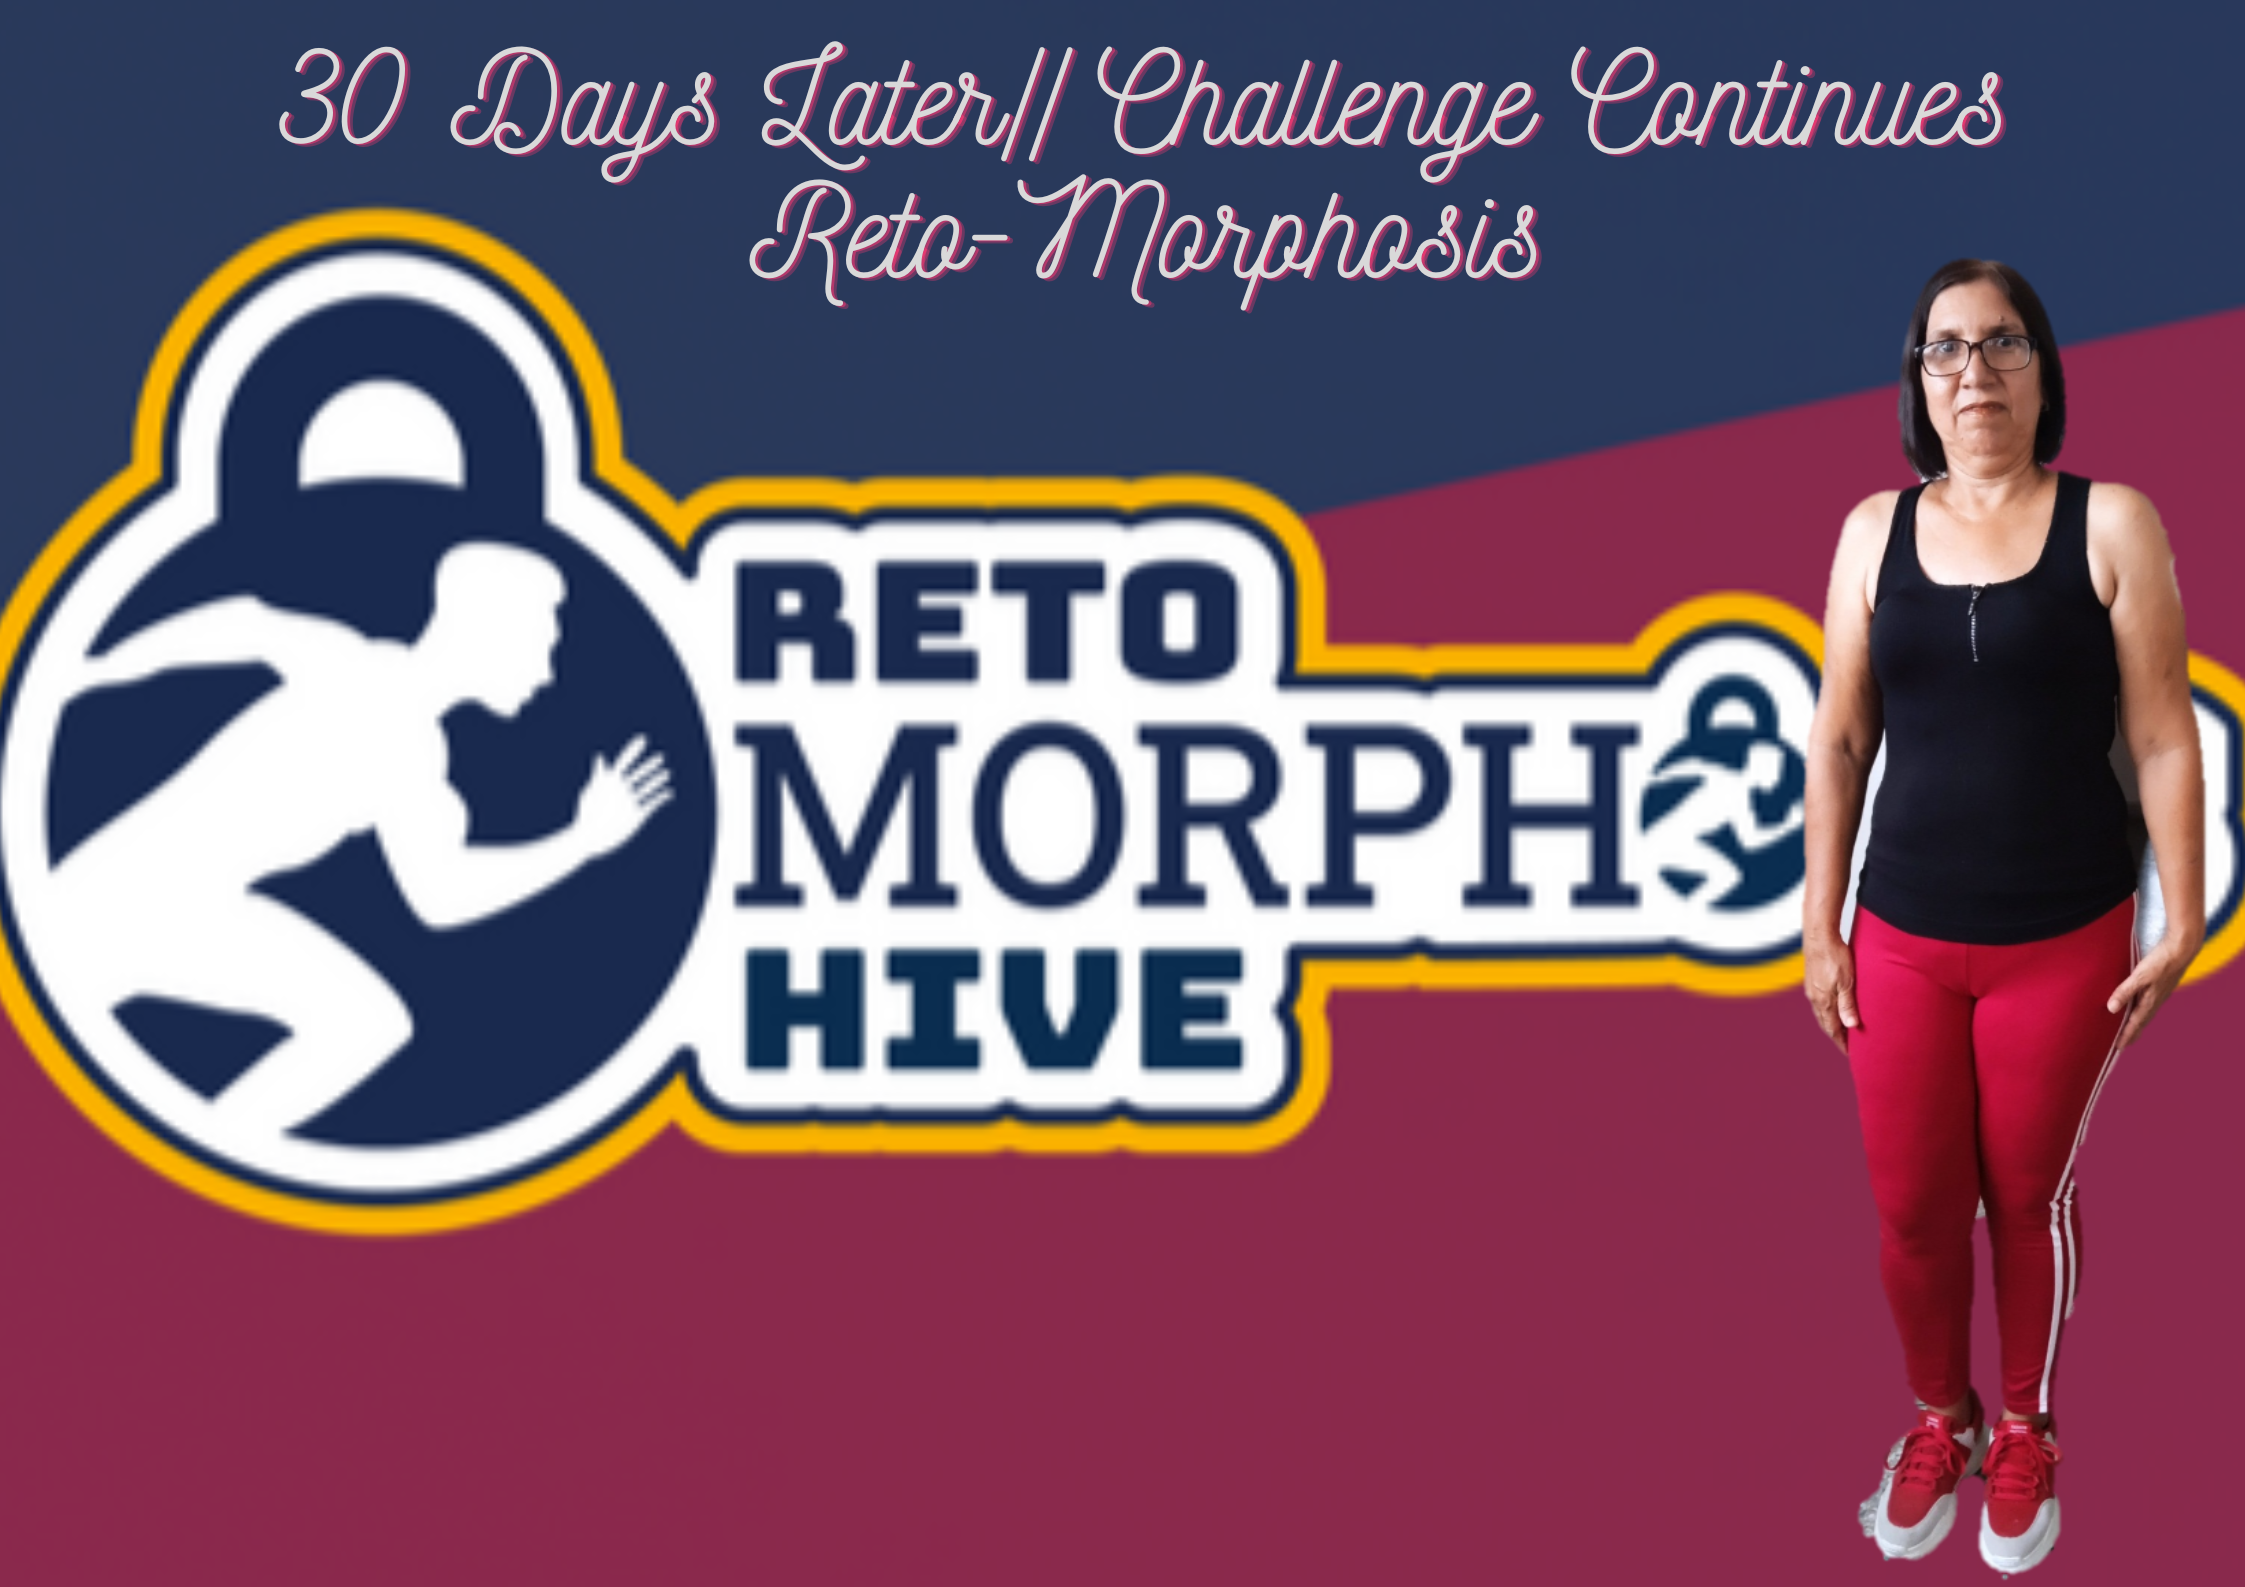 30 Days Later Challenge Continues Reto-Morphosis.png